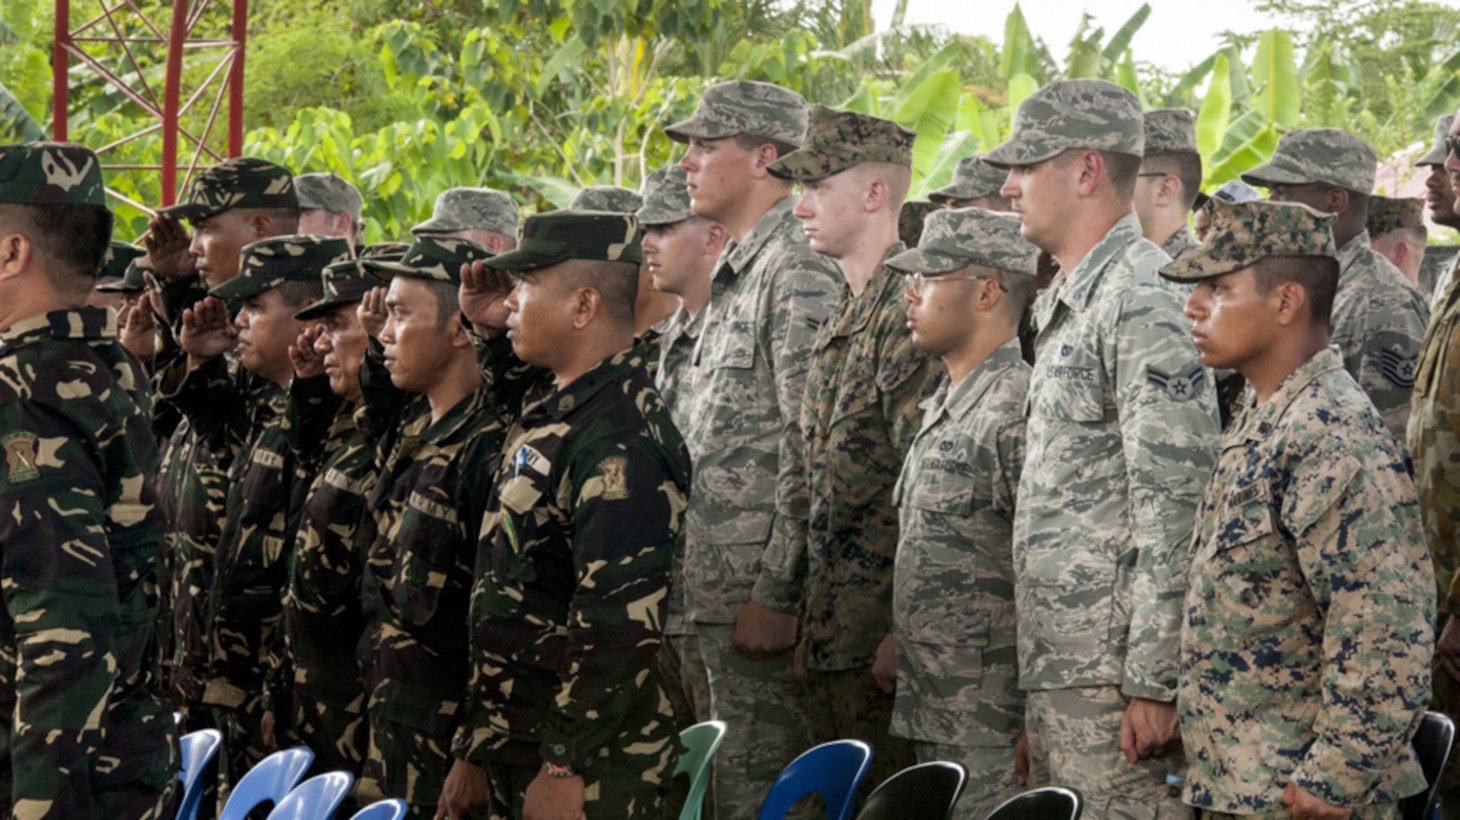 Philippine Soldiers and U.S. military engineers stand for the Philippine national anthem during a groundbreaking ceremony for Balikatan 2017 in Ormoc City, Leyte. Leaders from the Armed Forces of the Philippines, U.S. military, and Ormoc City gathered to commemorate the beginning of engineering projects for new classrooms at Margen Elementary School in Ormoc City, April 25, 2017. Balikatan is an annual U.S.-Philippine military bilateral exercise focused on a variety of missions, including humanitarian assistance and disaster relief and counterterrorism. 